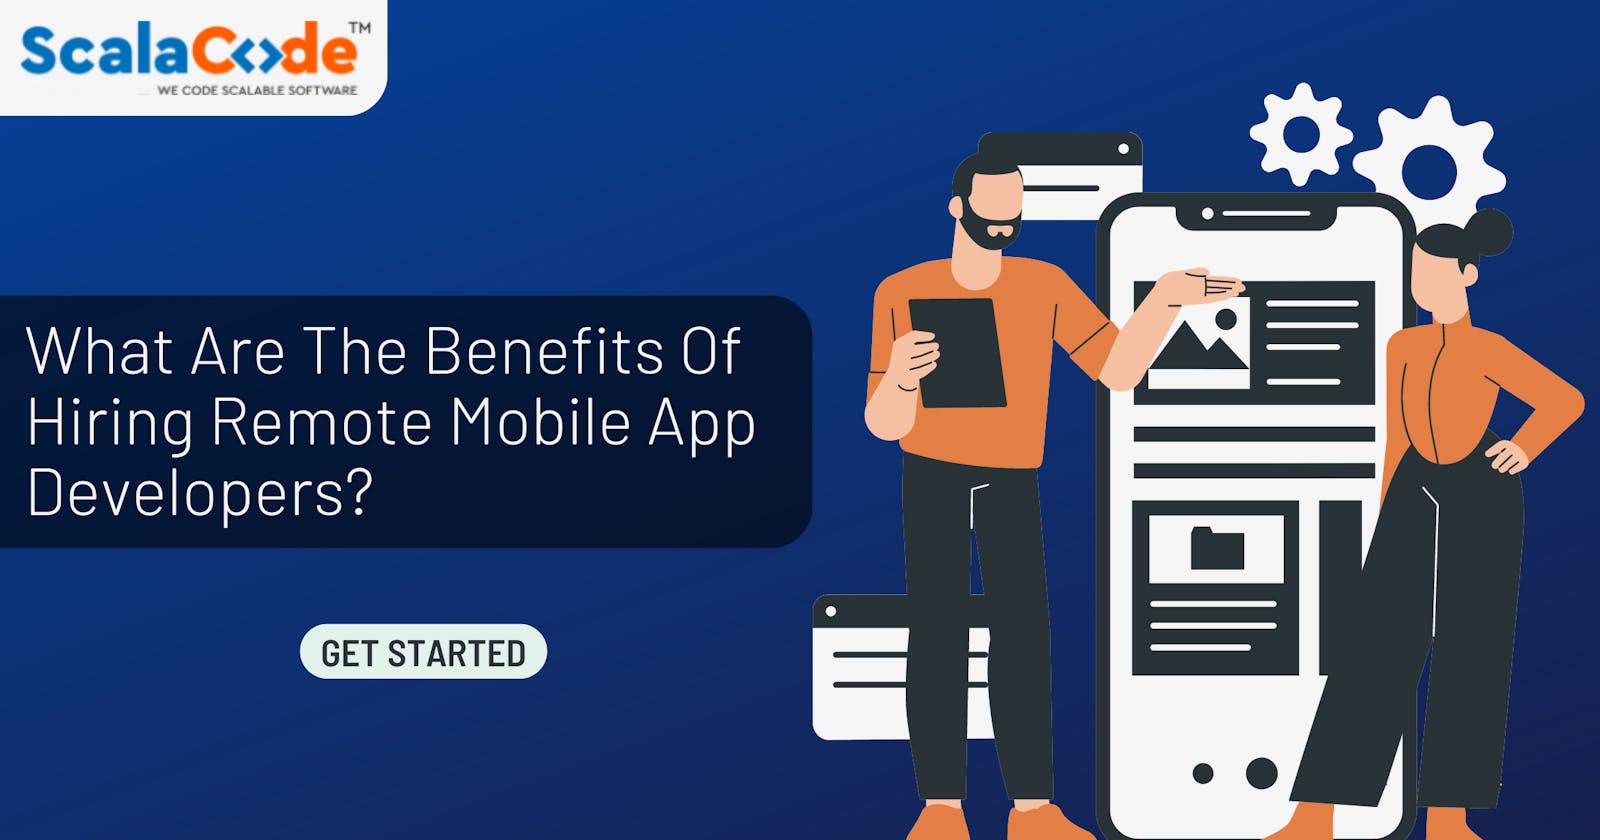 What Are the Benefits of Hiring Remote Mobile App Developers?